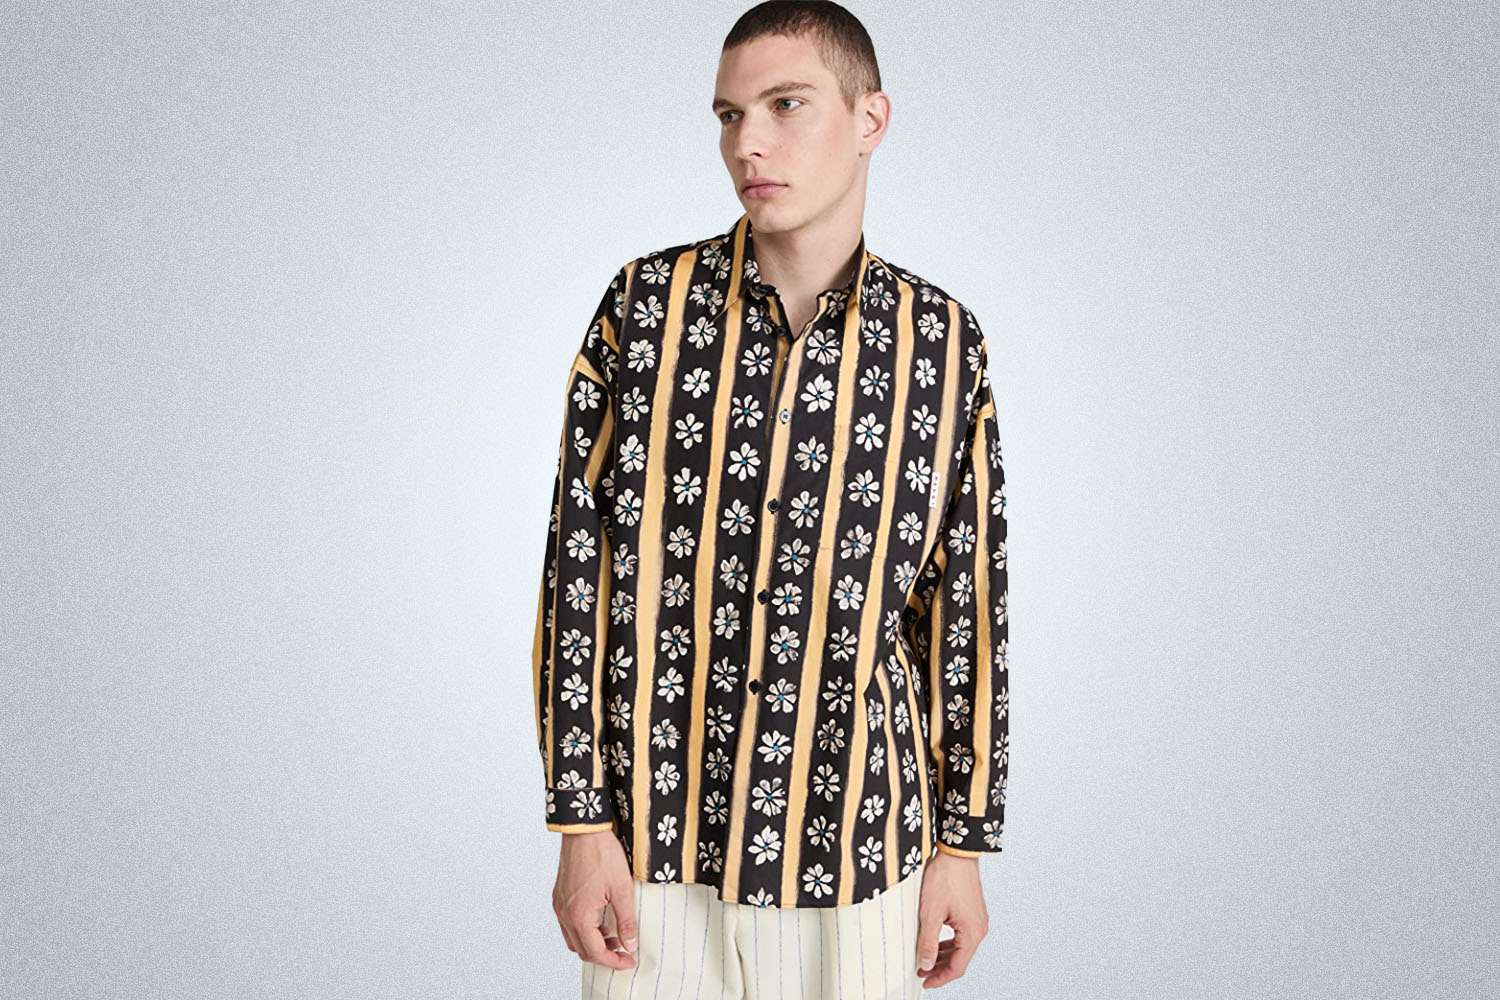 a black and yellow striped flower printed shirt from Marni on a grey background